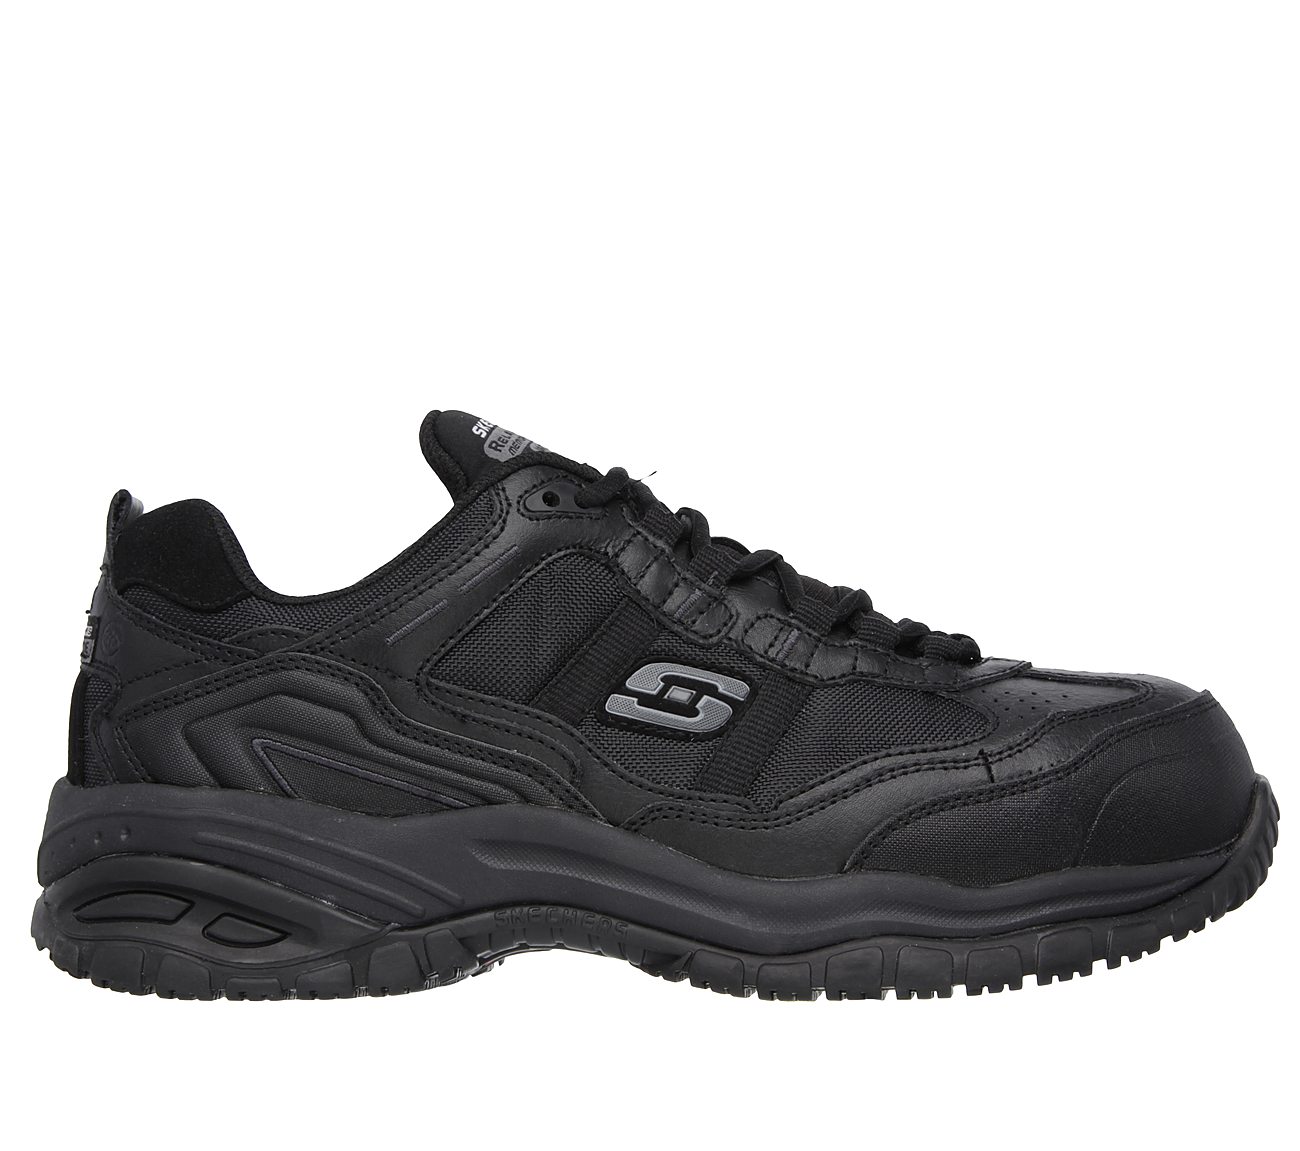 Grinnell Comp Toe SKECHERS Work Shoes